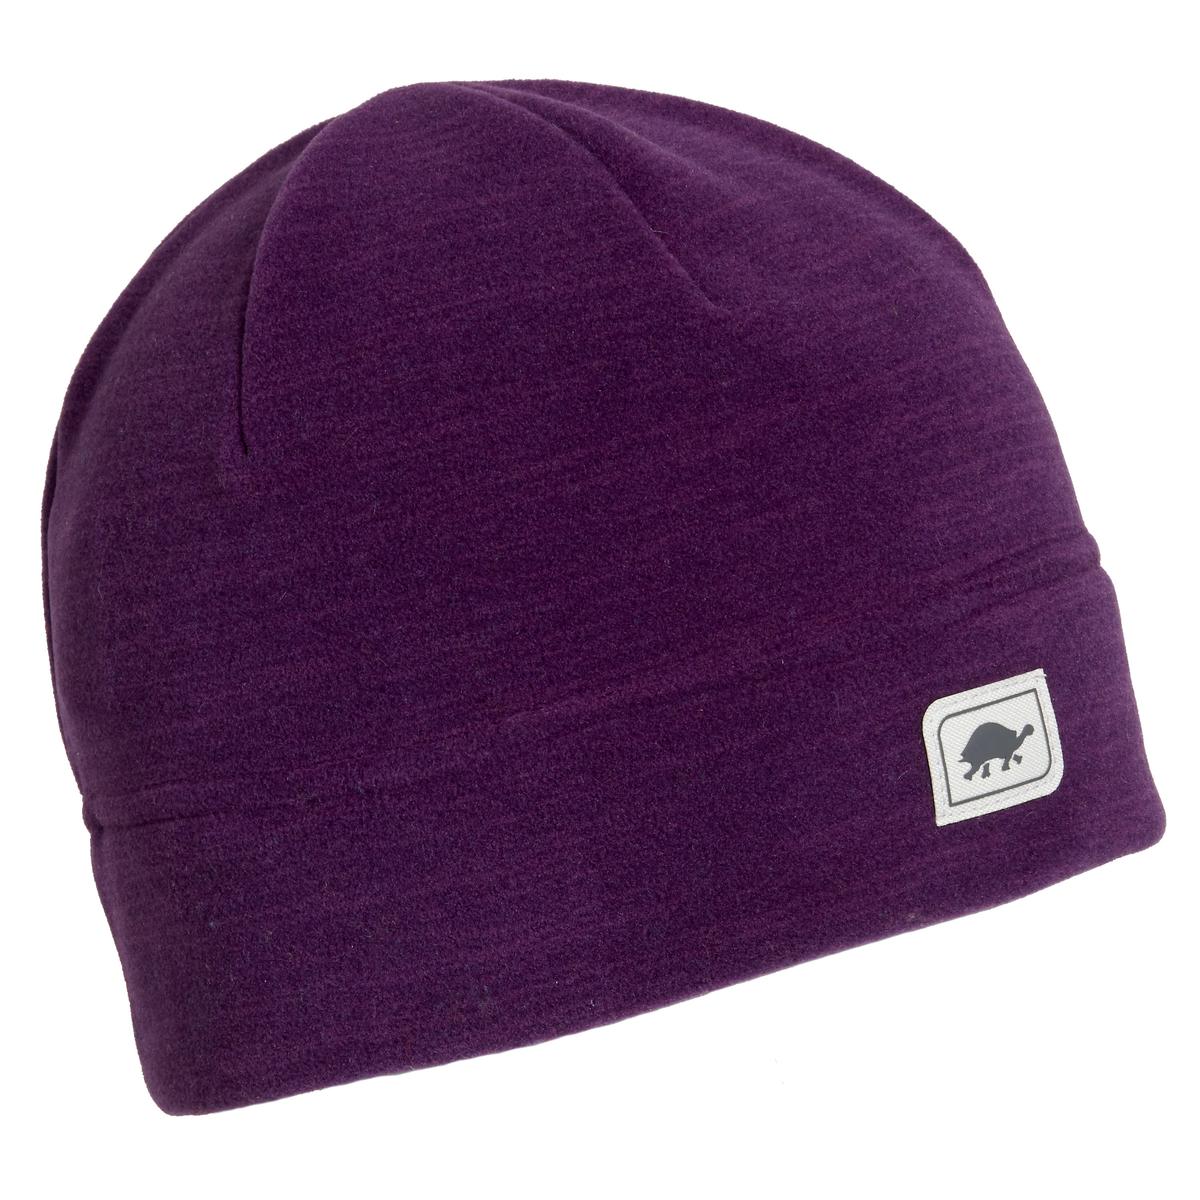 Polartec Thermal Pro Fleece Beanie / Color-Planet Of The Grapes